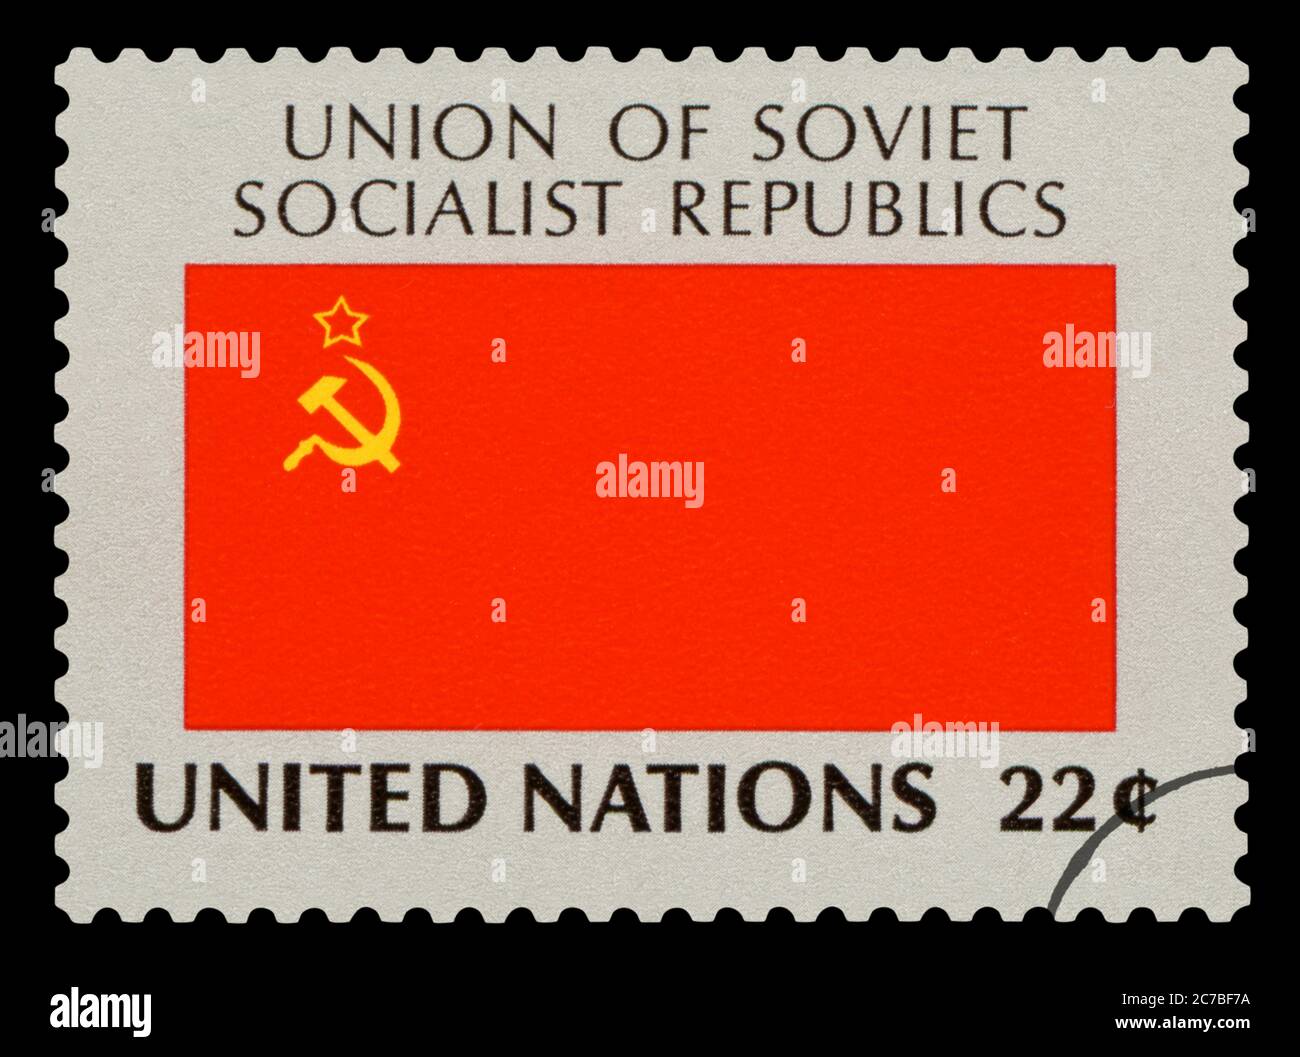 USSR - Postage Stamp of USSR national flag, Series of United Nations, circa 1984. Isolated on black background. Stock Photo